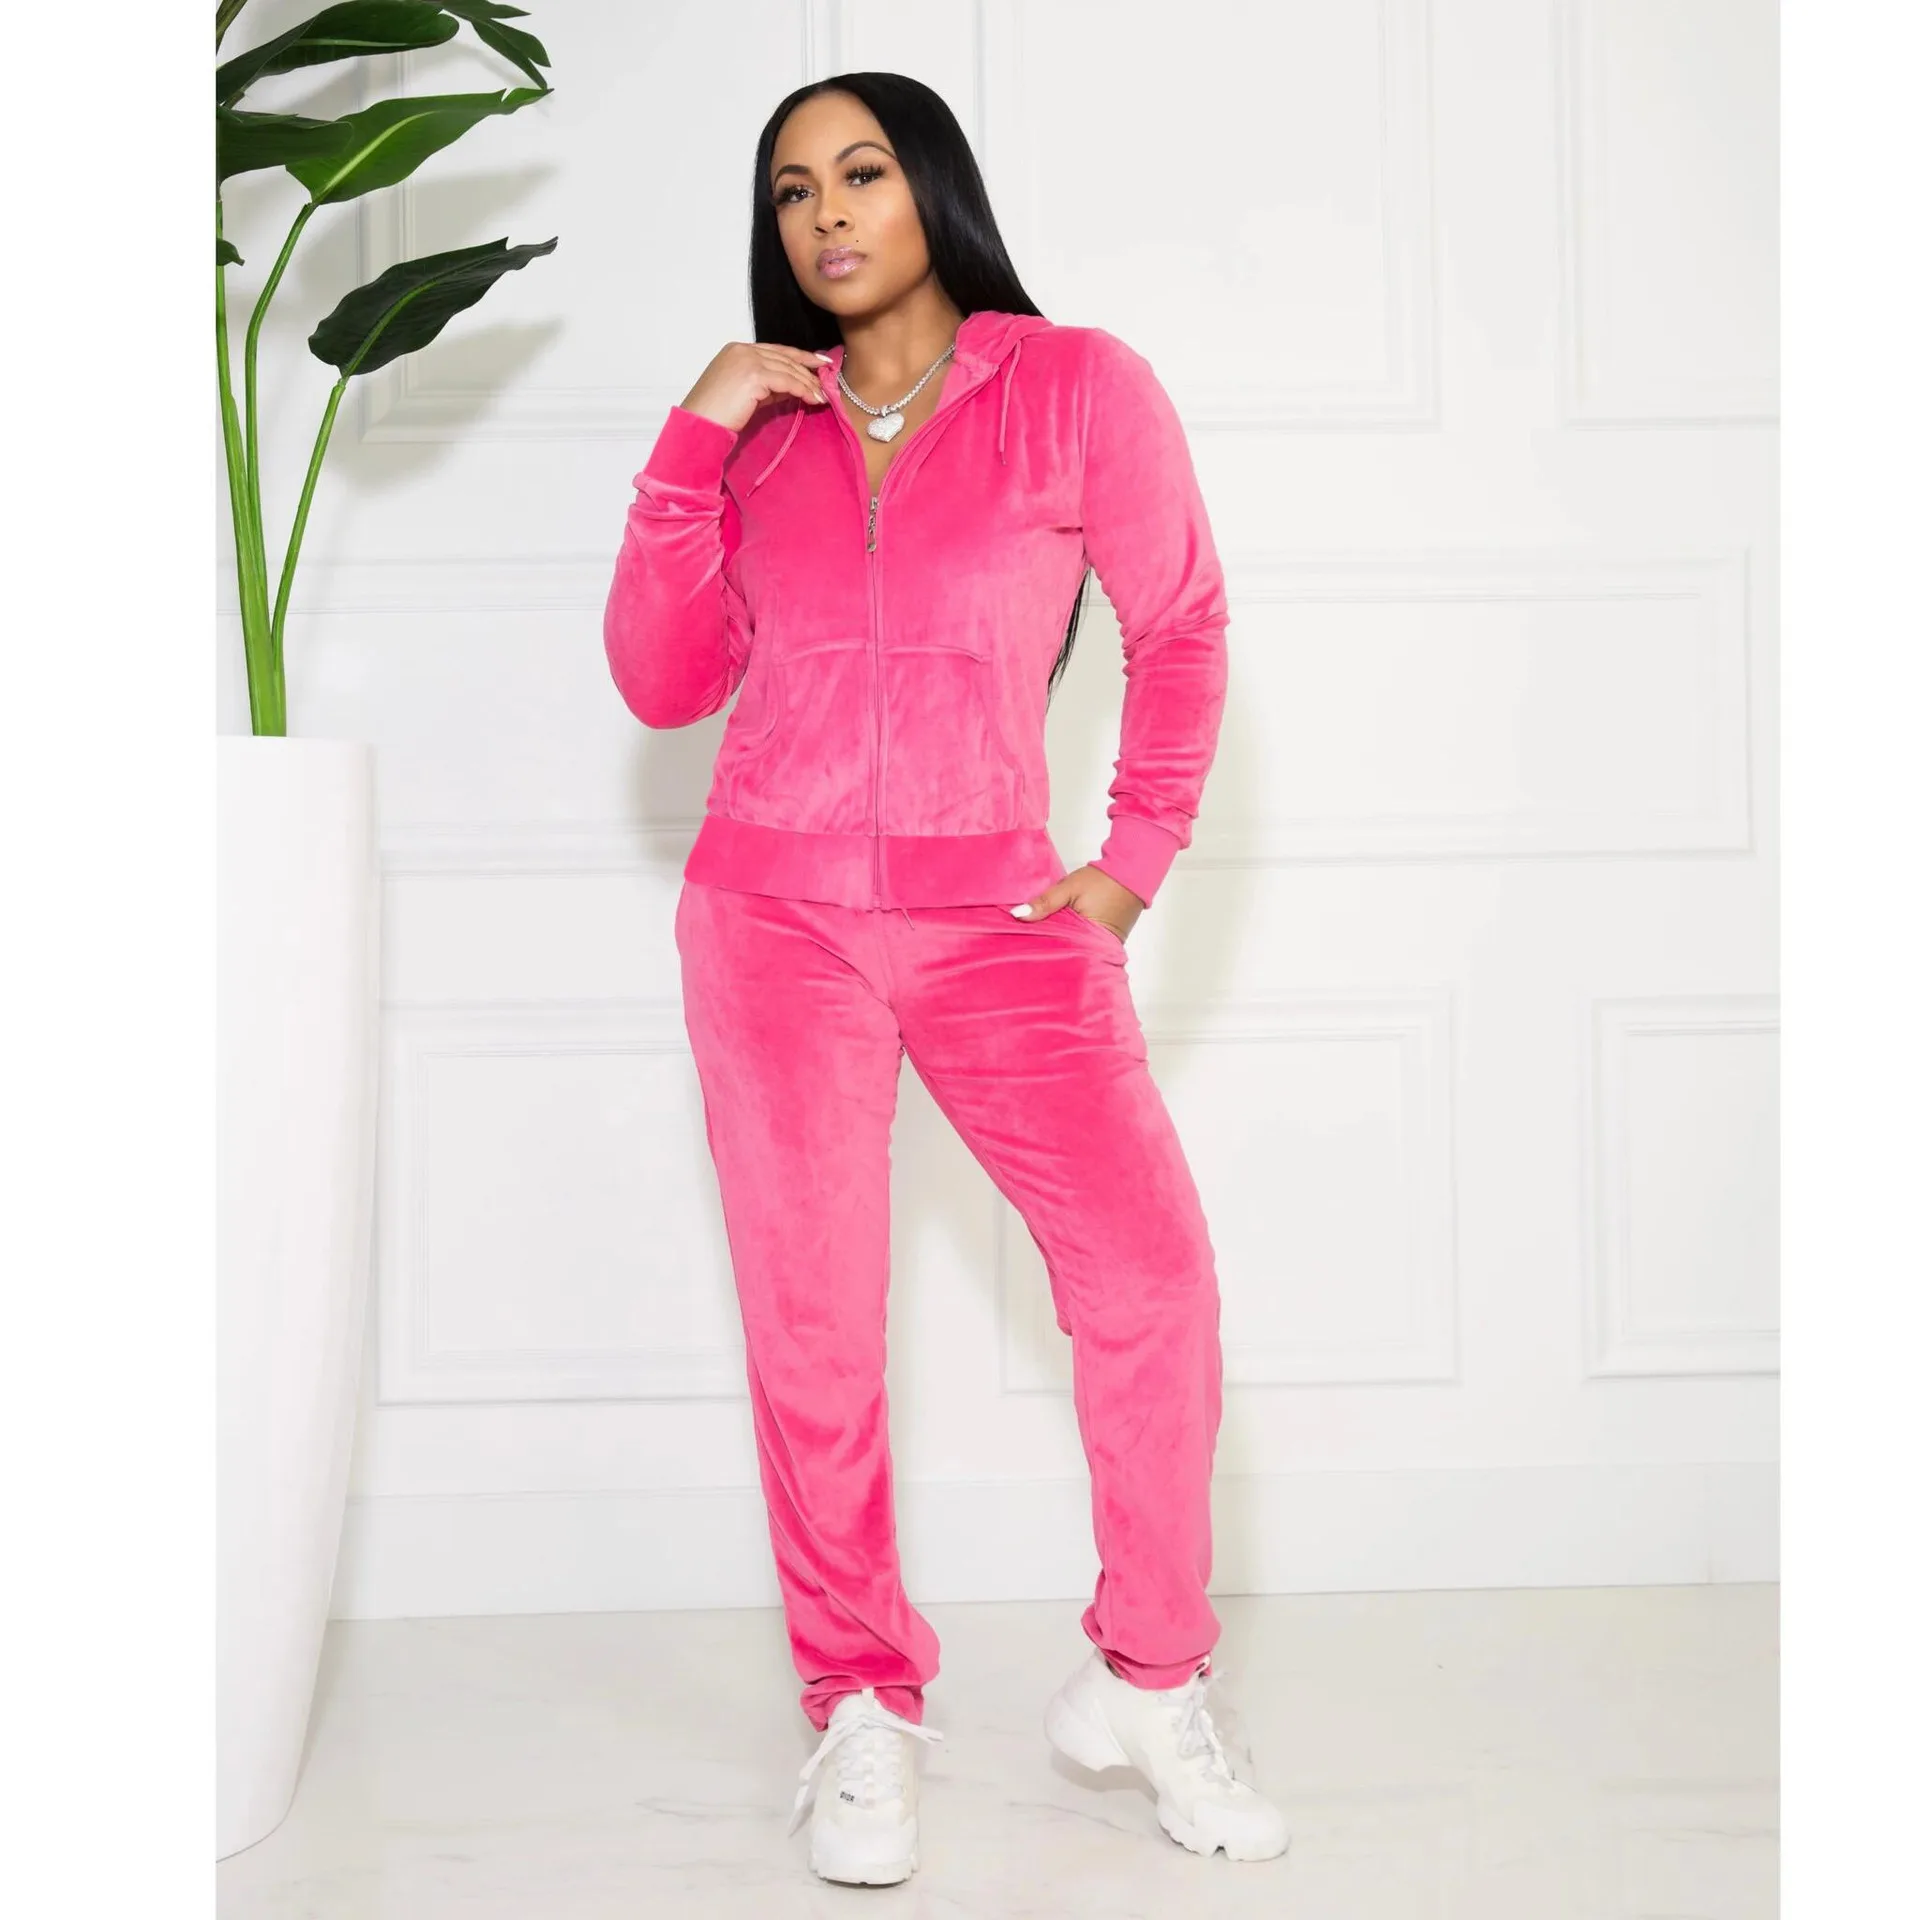 Winter/Fall 2021 Women's Brand Velvet Fabric Tracksuits Velour Suit Women Track Suit Hoodies And Pants Sportswear Outfits yellow pant suit